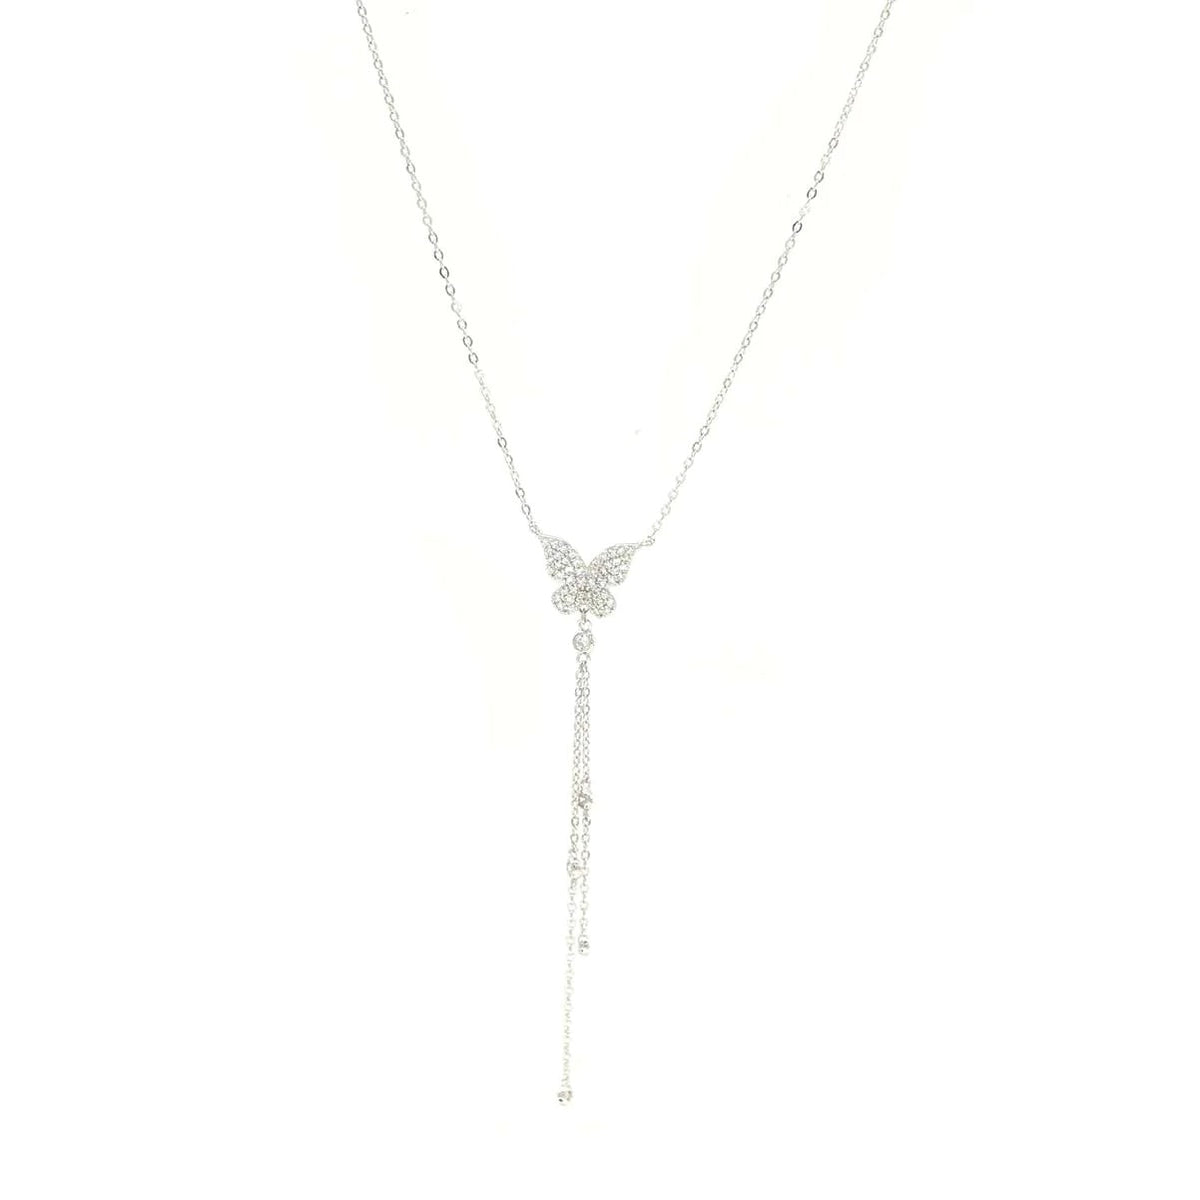 Butterfly lariat y necklace with pave diamond cz .295 sterling silver waterproof will not tarnish or turn green popular trending necklaces for low neck shirts and dresses Miami shopping, influencer style Kesley Boutique